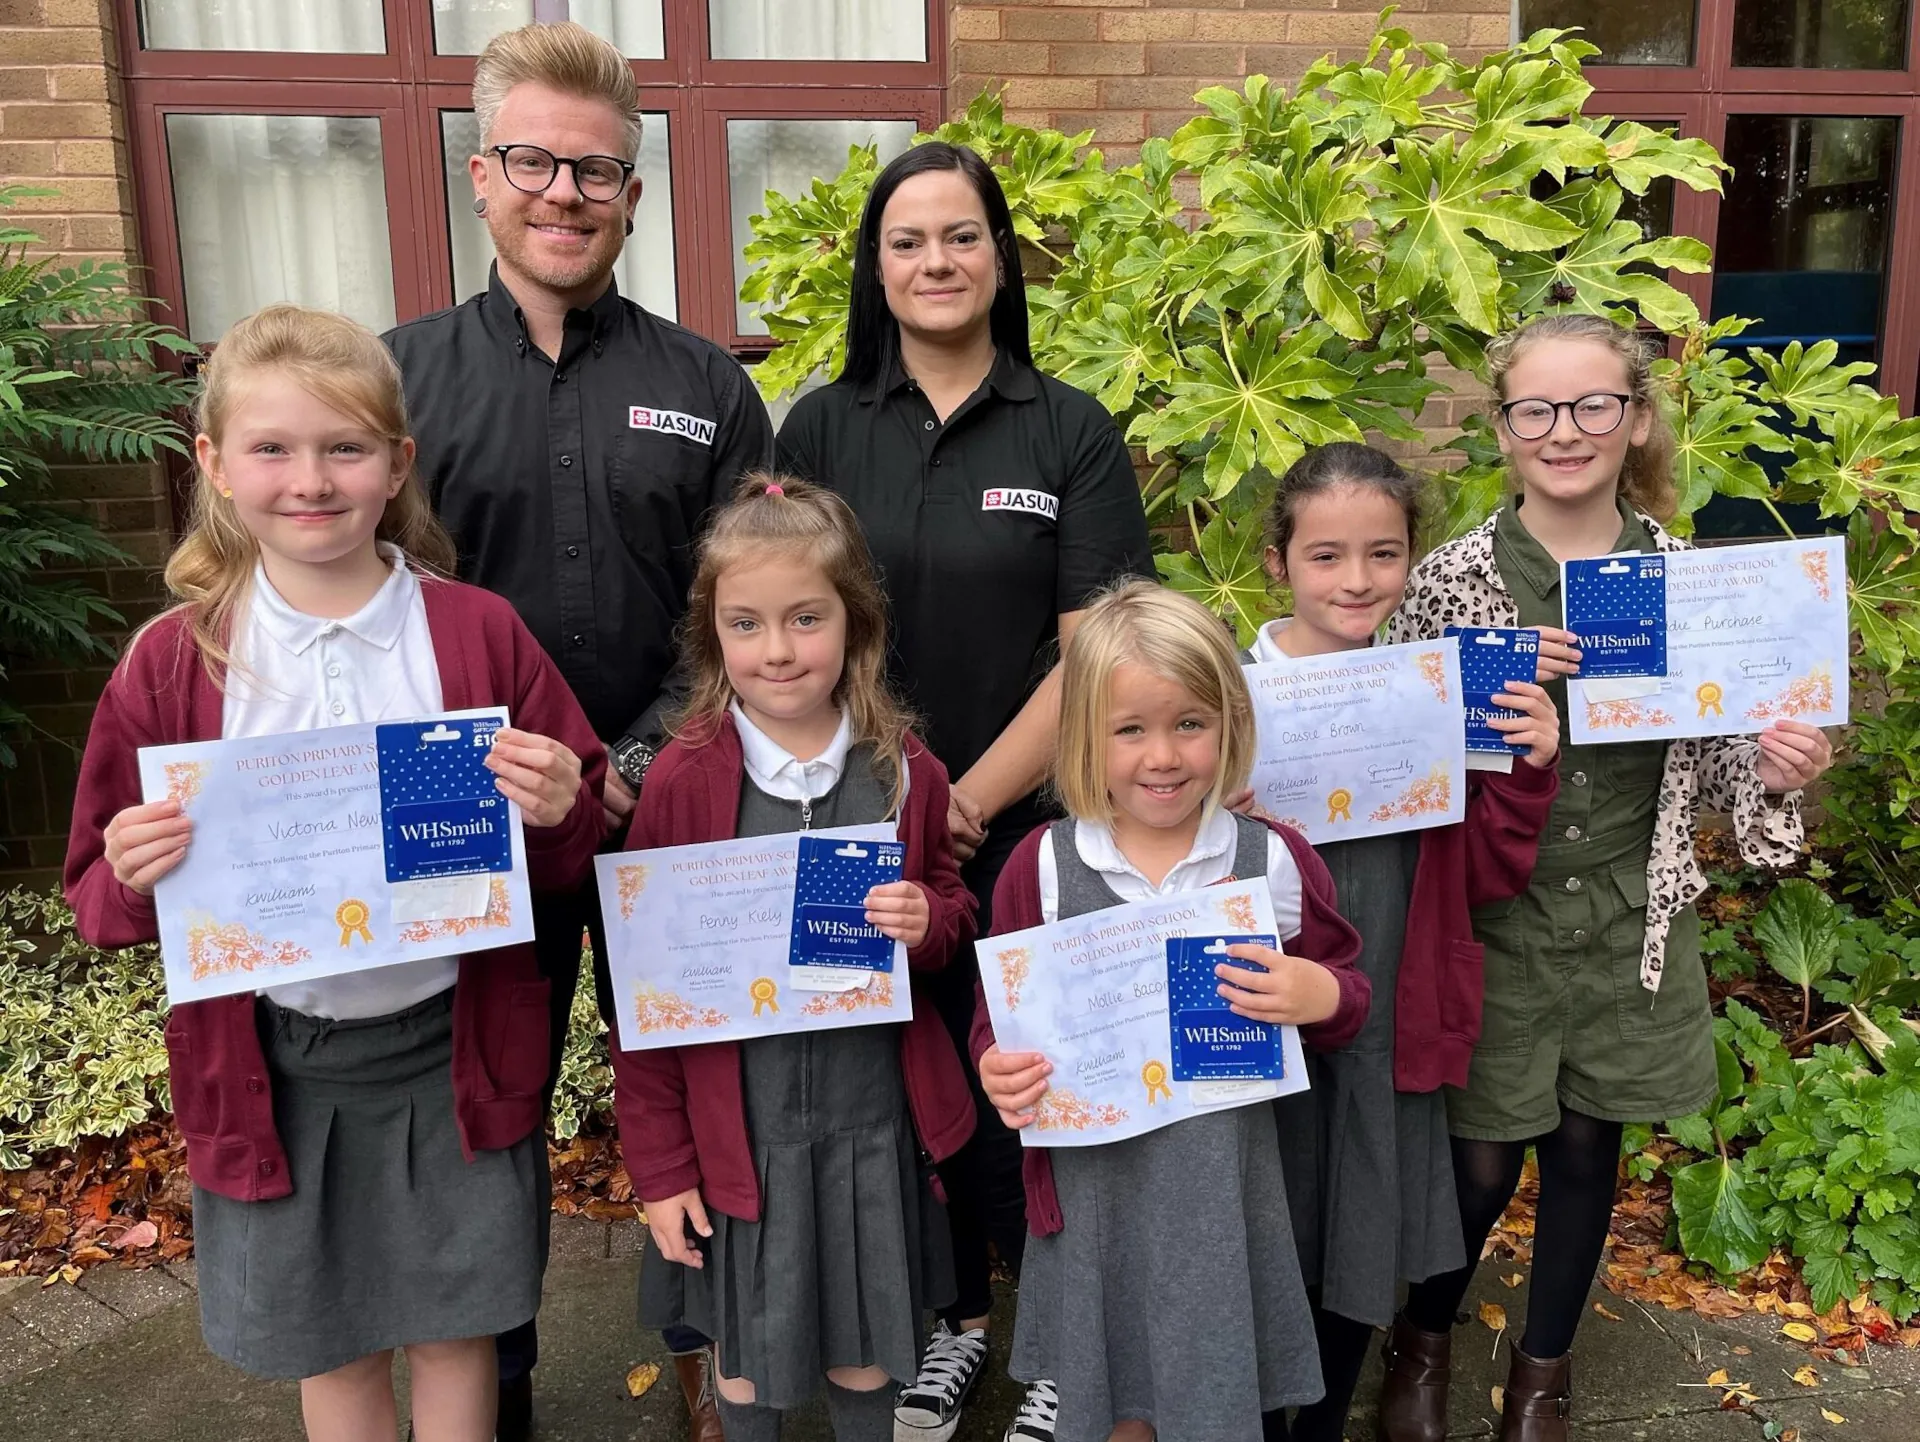 Jason Day LEV Division Manager and Eloise Day Marketing Assistant at Jasun Envirocare with children from Puriton Primary School